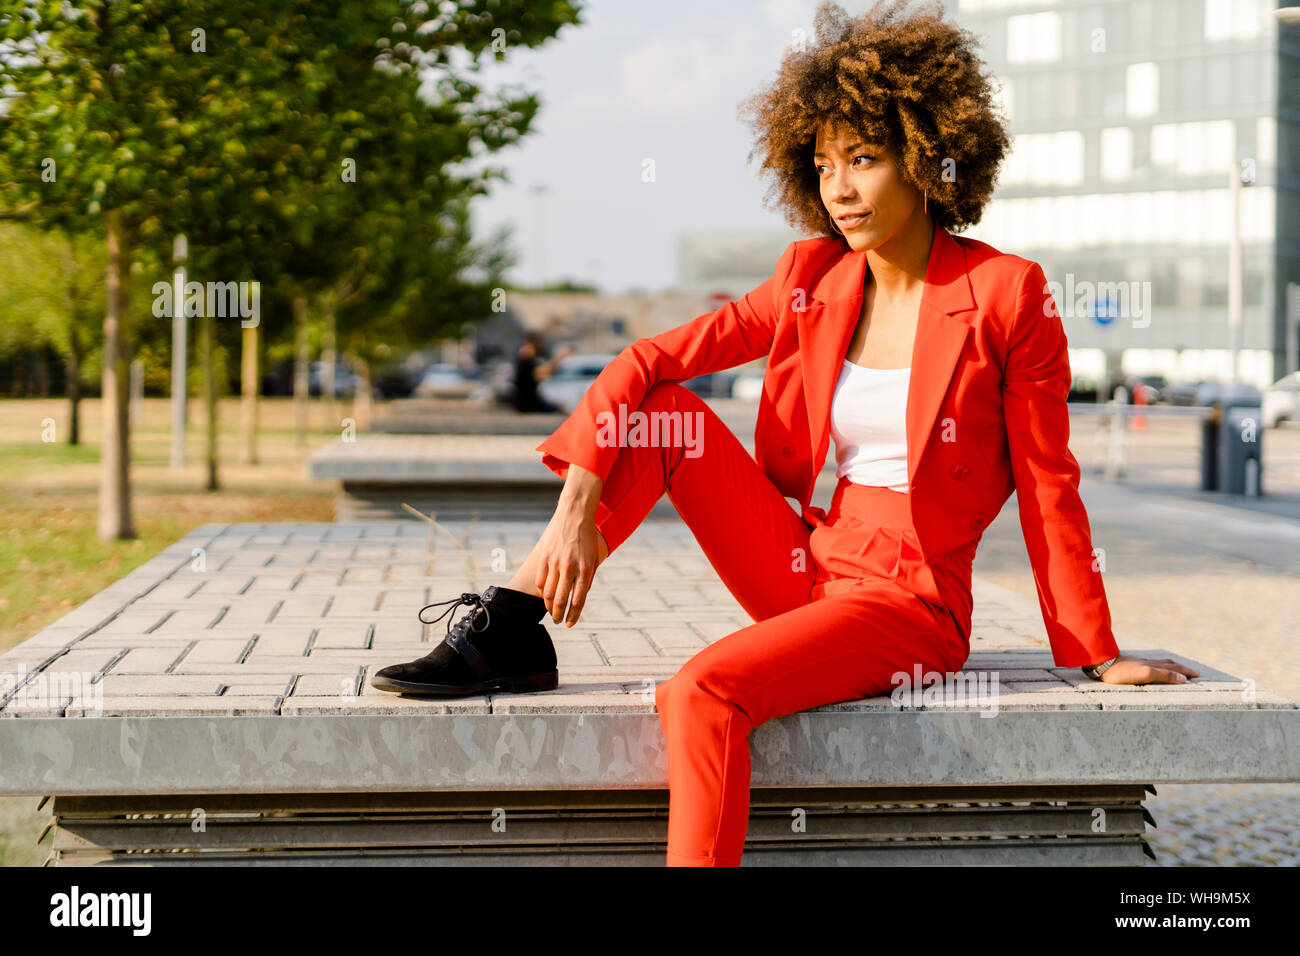 Portrait of young woman wearing fashionable red pantsuit Stock Photo